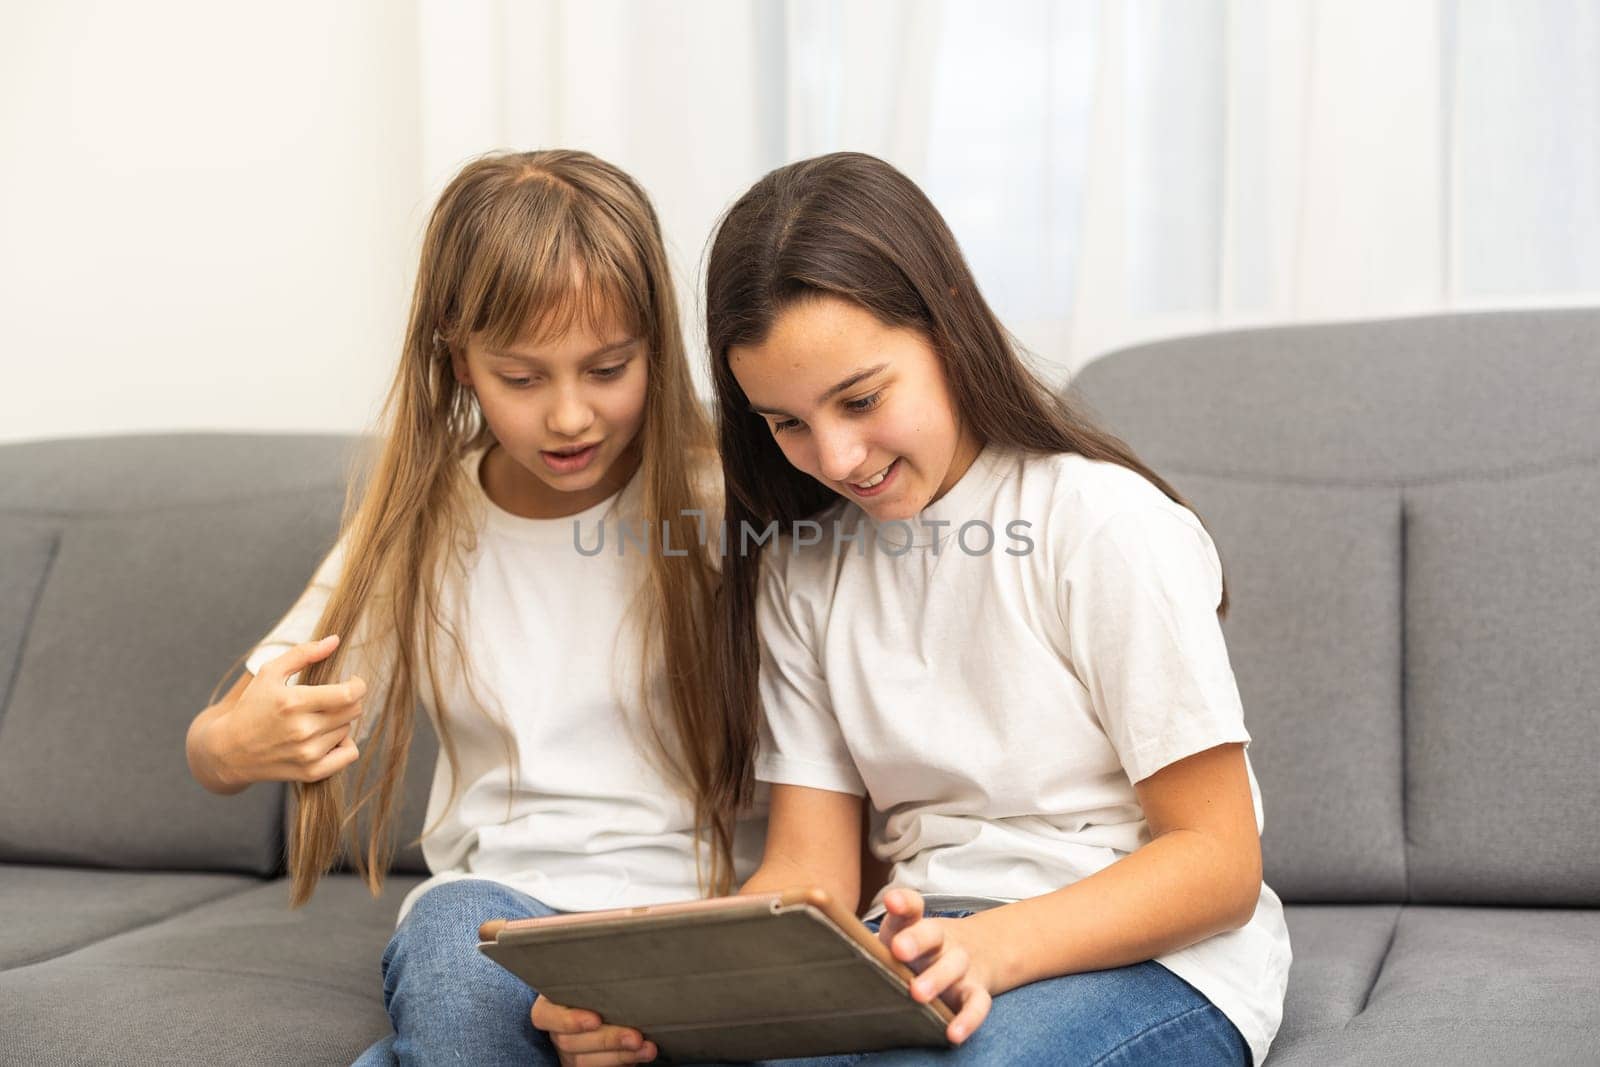 Young twins using a laptop and a tablet sitting on a couch in the living room by Andelov13